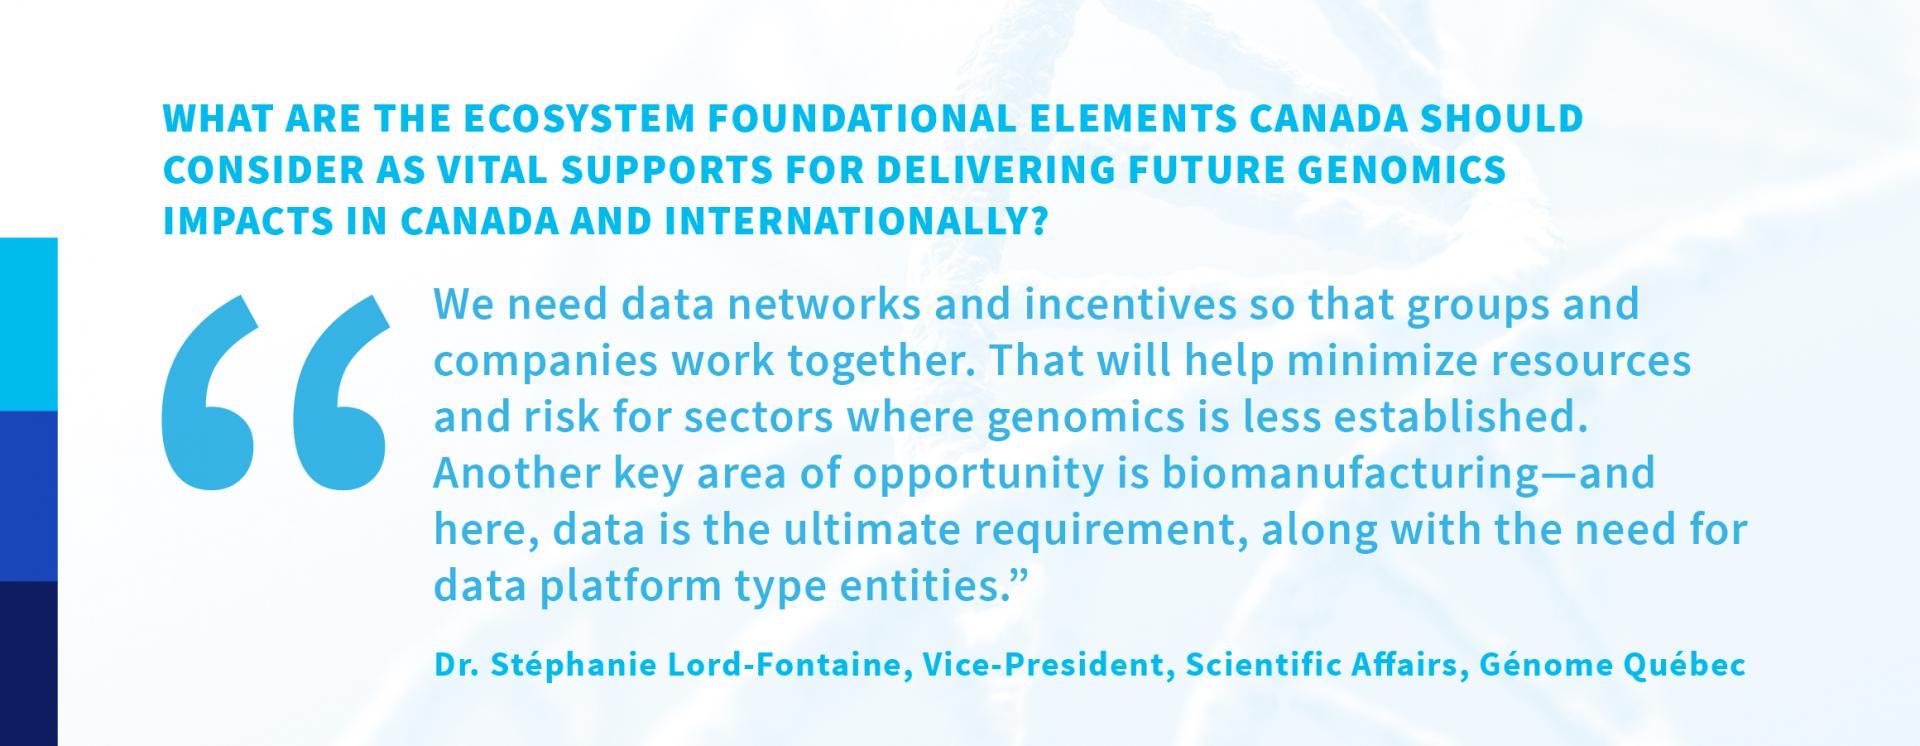 What are the ecosystem foundational elements Canada should consider as vital supports for delivering future genomics impacts in Canada and internationally? “We need data networks and incentives so that groups and companies work together. That will help minimize resources and risk for sectors where genomics is less established. Another key area of opportunity is biomanufacturing—and here, data is the ultimate requirement, along with the need for data platform type entities.” —Dr. Stéphanie Lord-Fontaine, Vice-President, Scientific Affairs, Génome Québec 